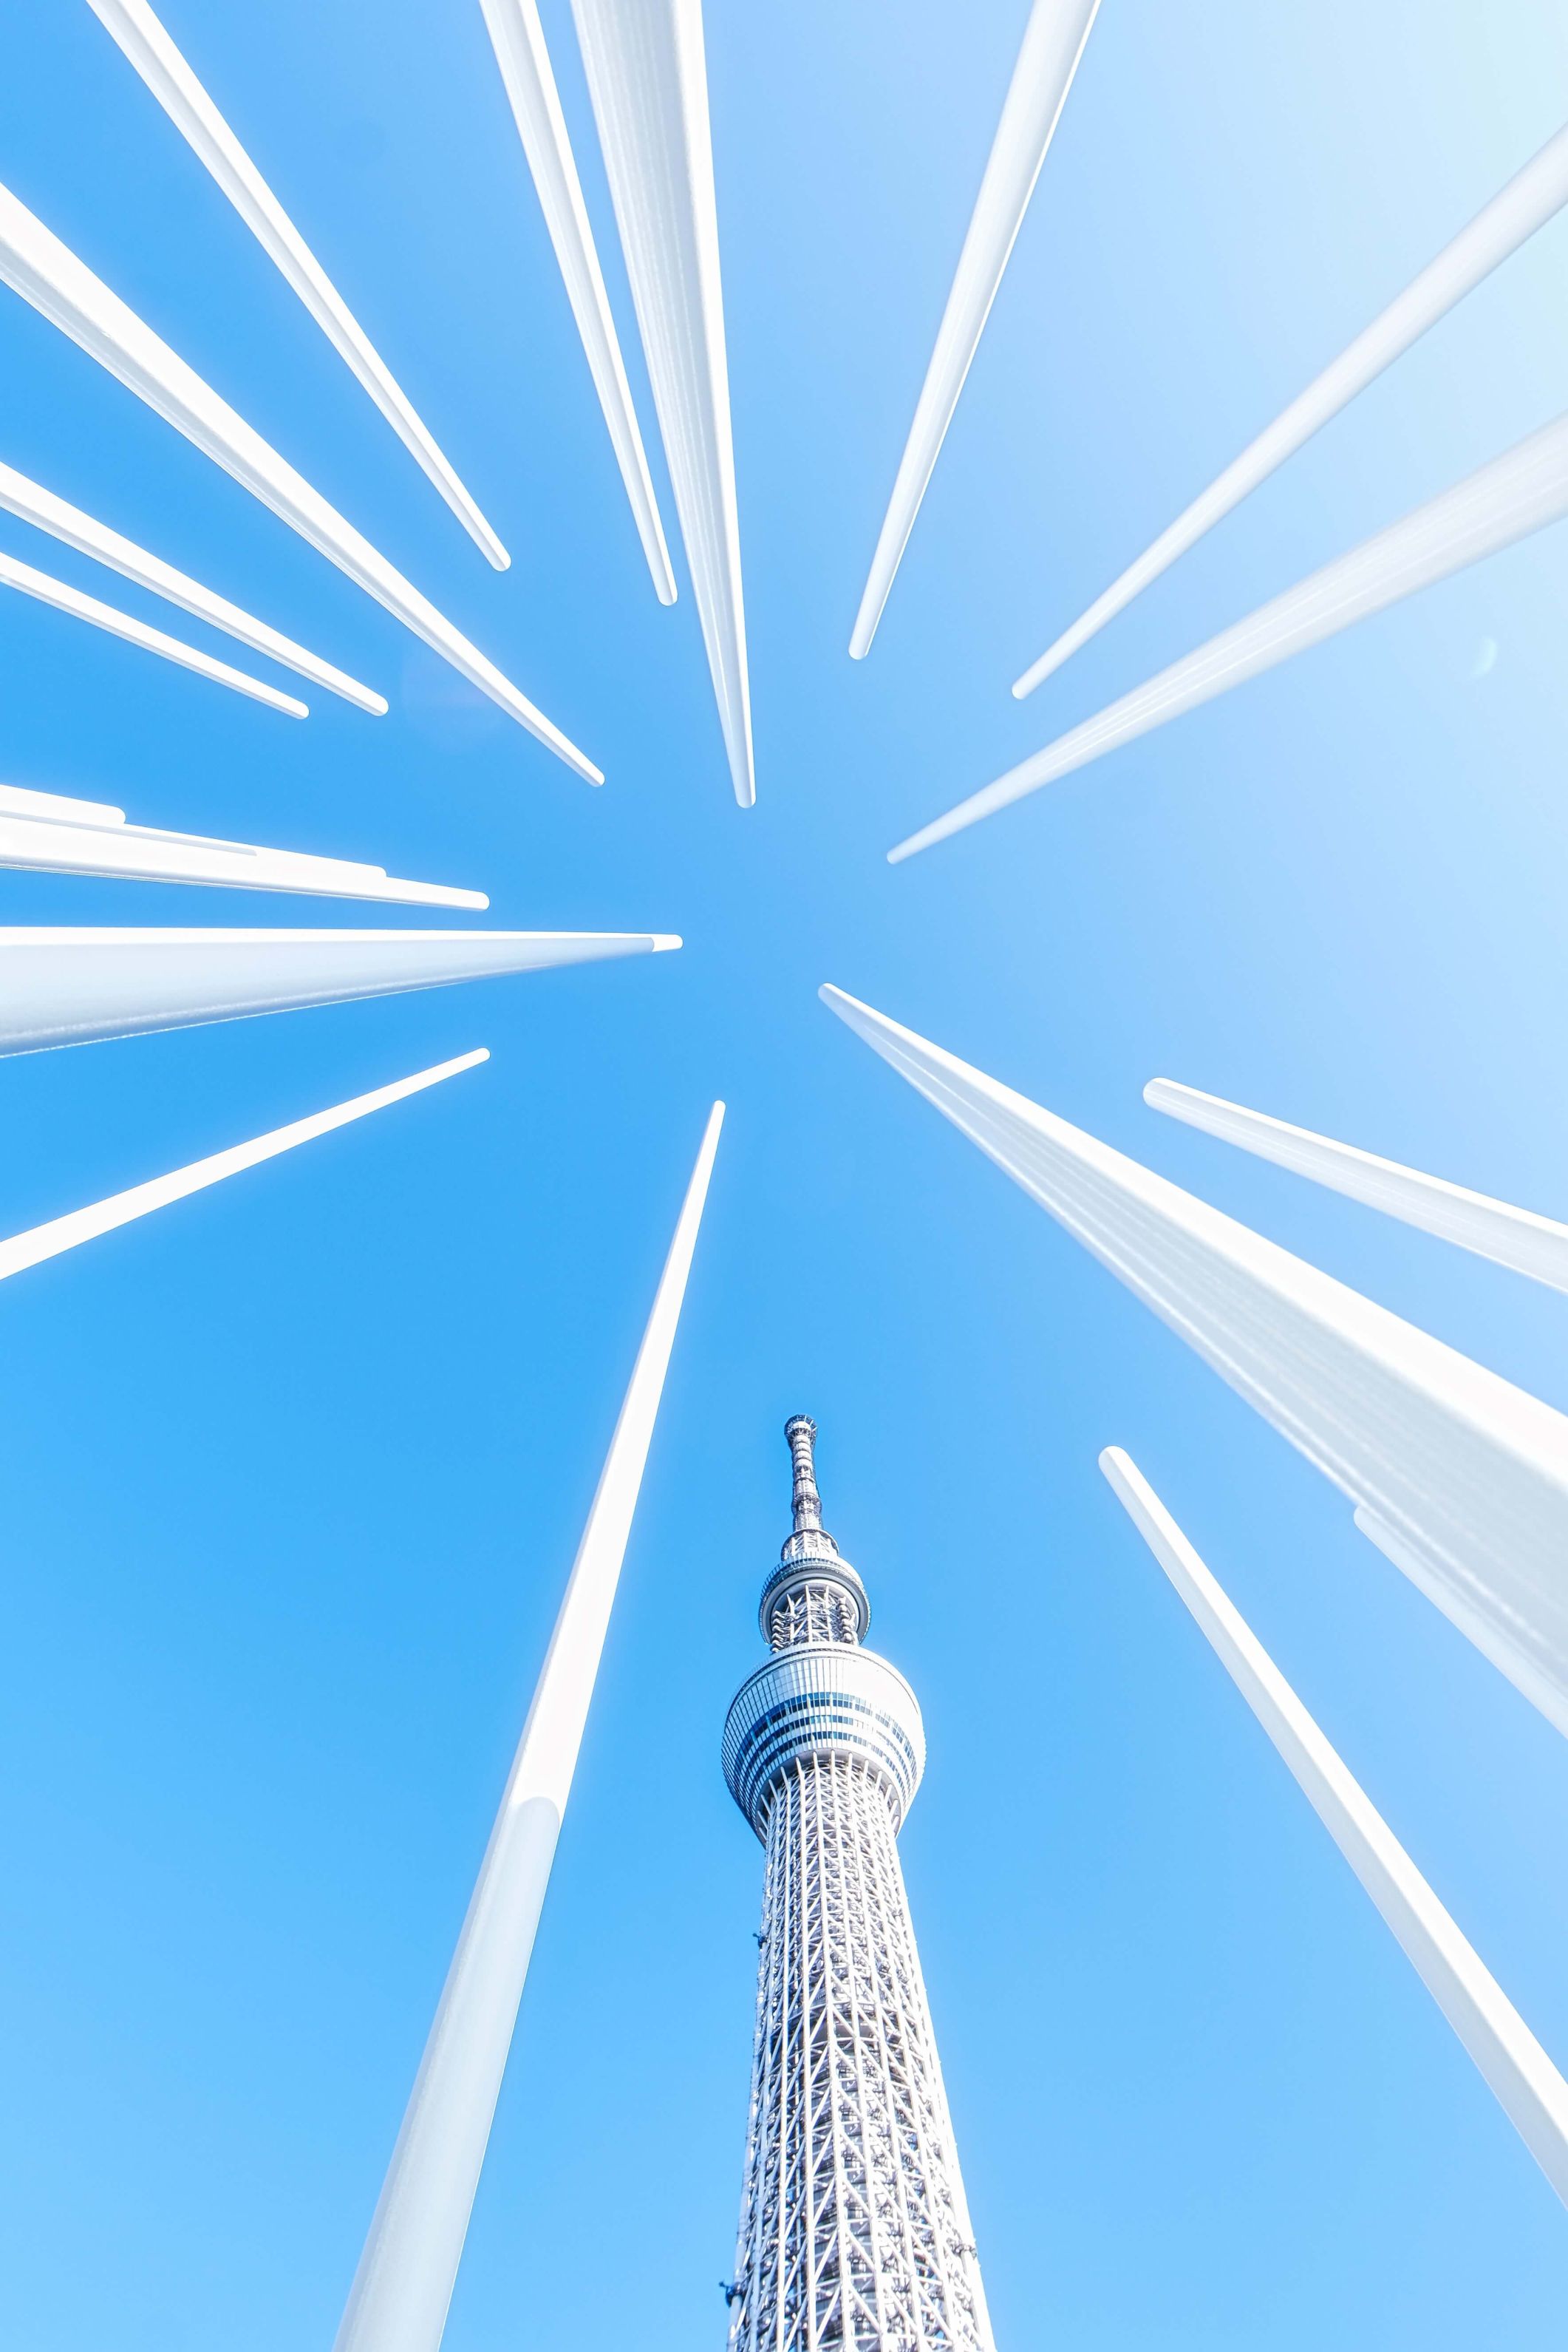 During the day the pole shines white like the Skytree. It is fun moving your camera to compose the poles and the tower as you like.